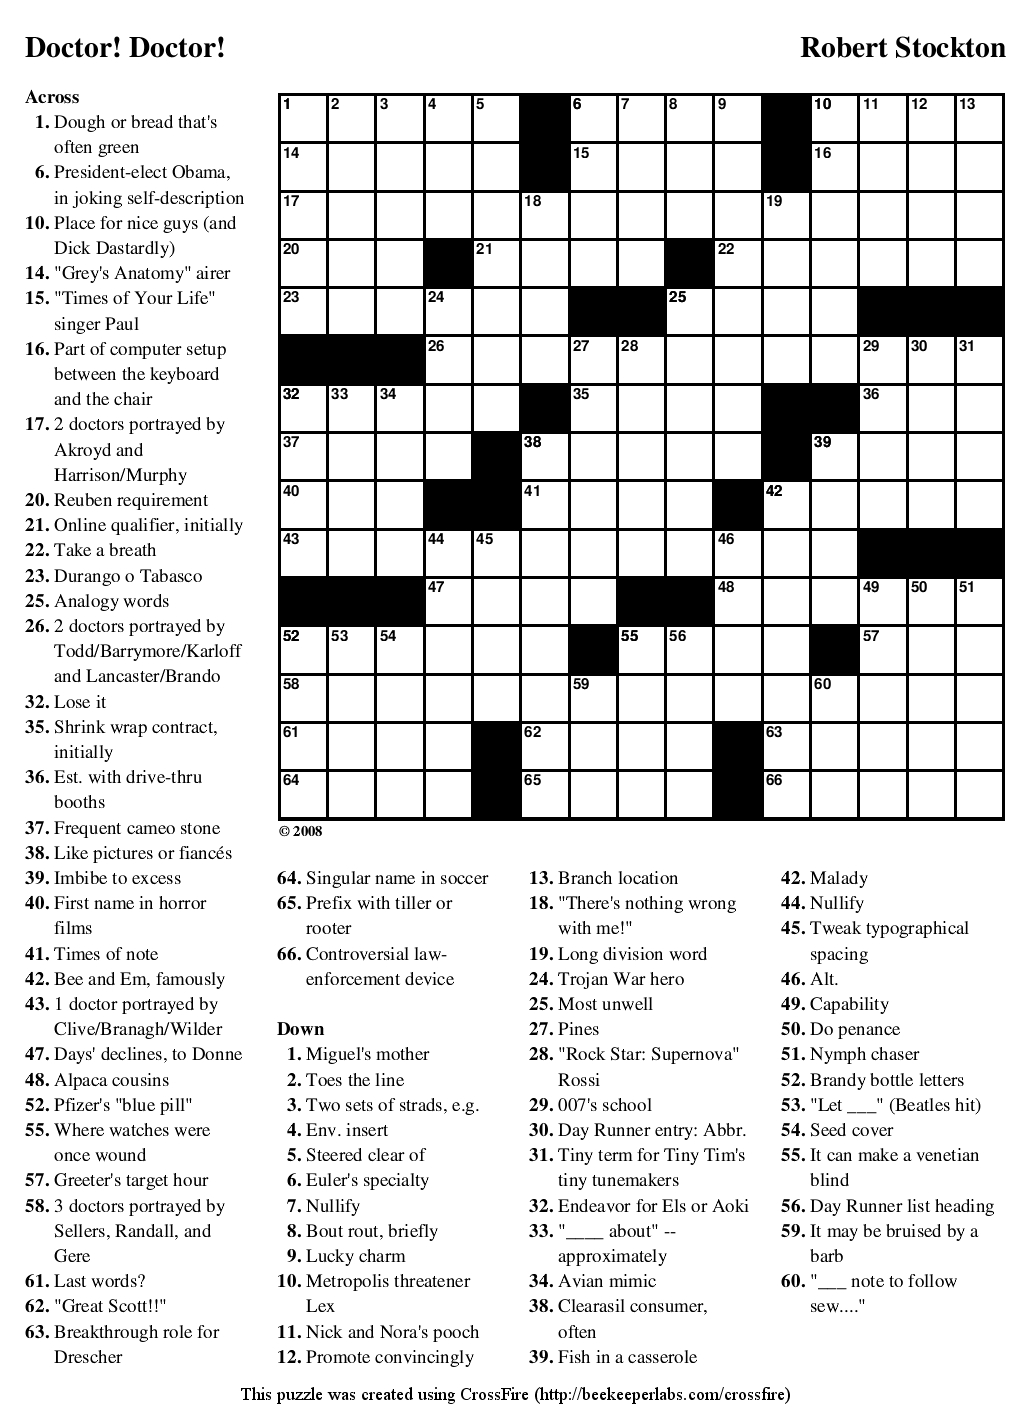 Crossword Puzzles Printable - Yahoo Image Search Results | Crossword - Crossword Puzzle Maker That Is Printable